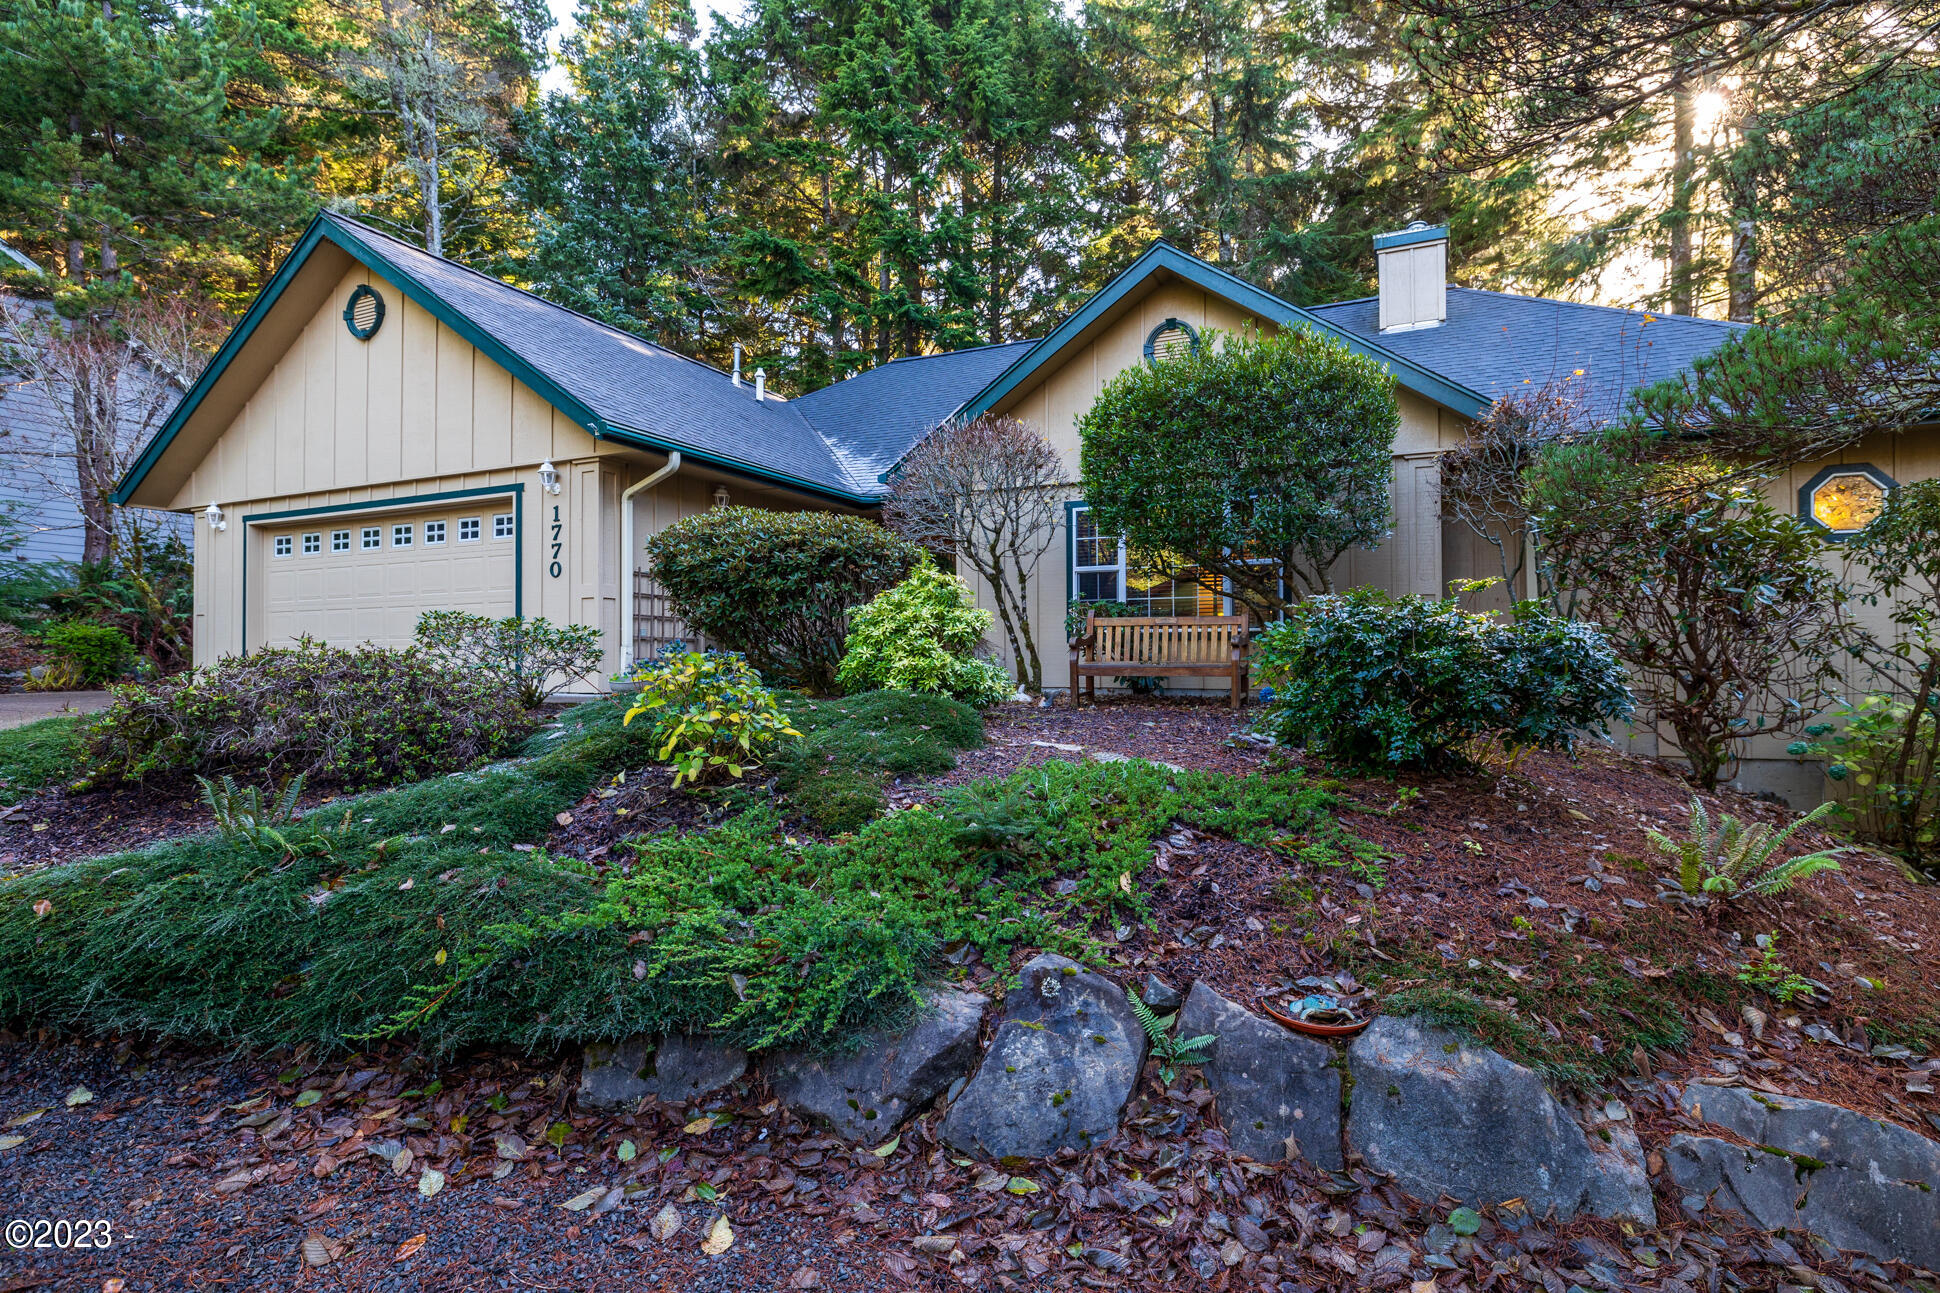 1770 SW Walking Wood Depoe Bay, Gleneden Beach, Lincoln City, Newport, Otis, Rose Lodge, Seal Rock, Waldport, Yachats, To Home Listings - Amy Plechaty, Emerald Coast Realty Real Estate, homes for sale, property for sale